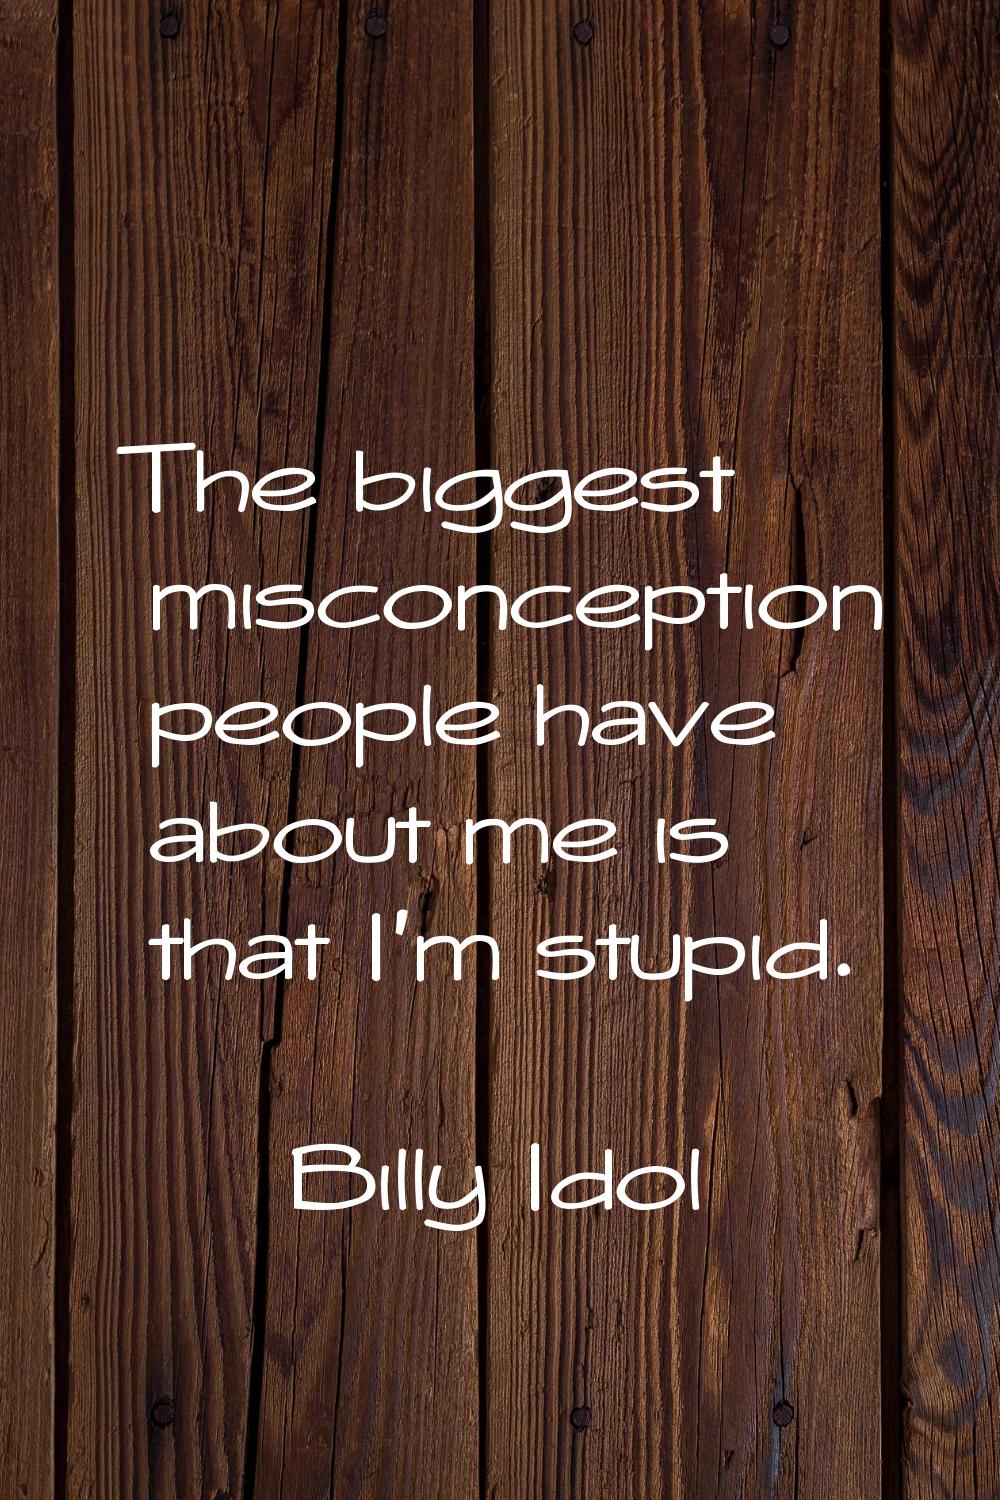 The biggest misconception people have about me is that I'm stupid.